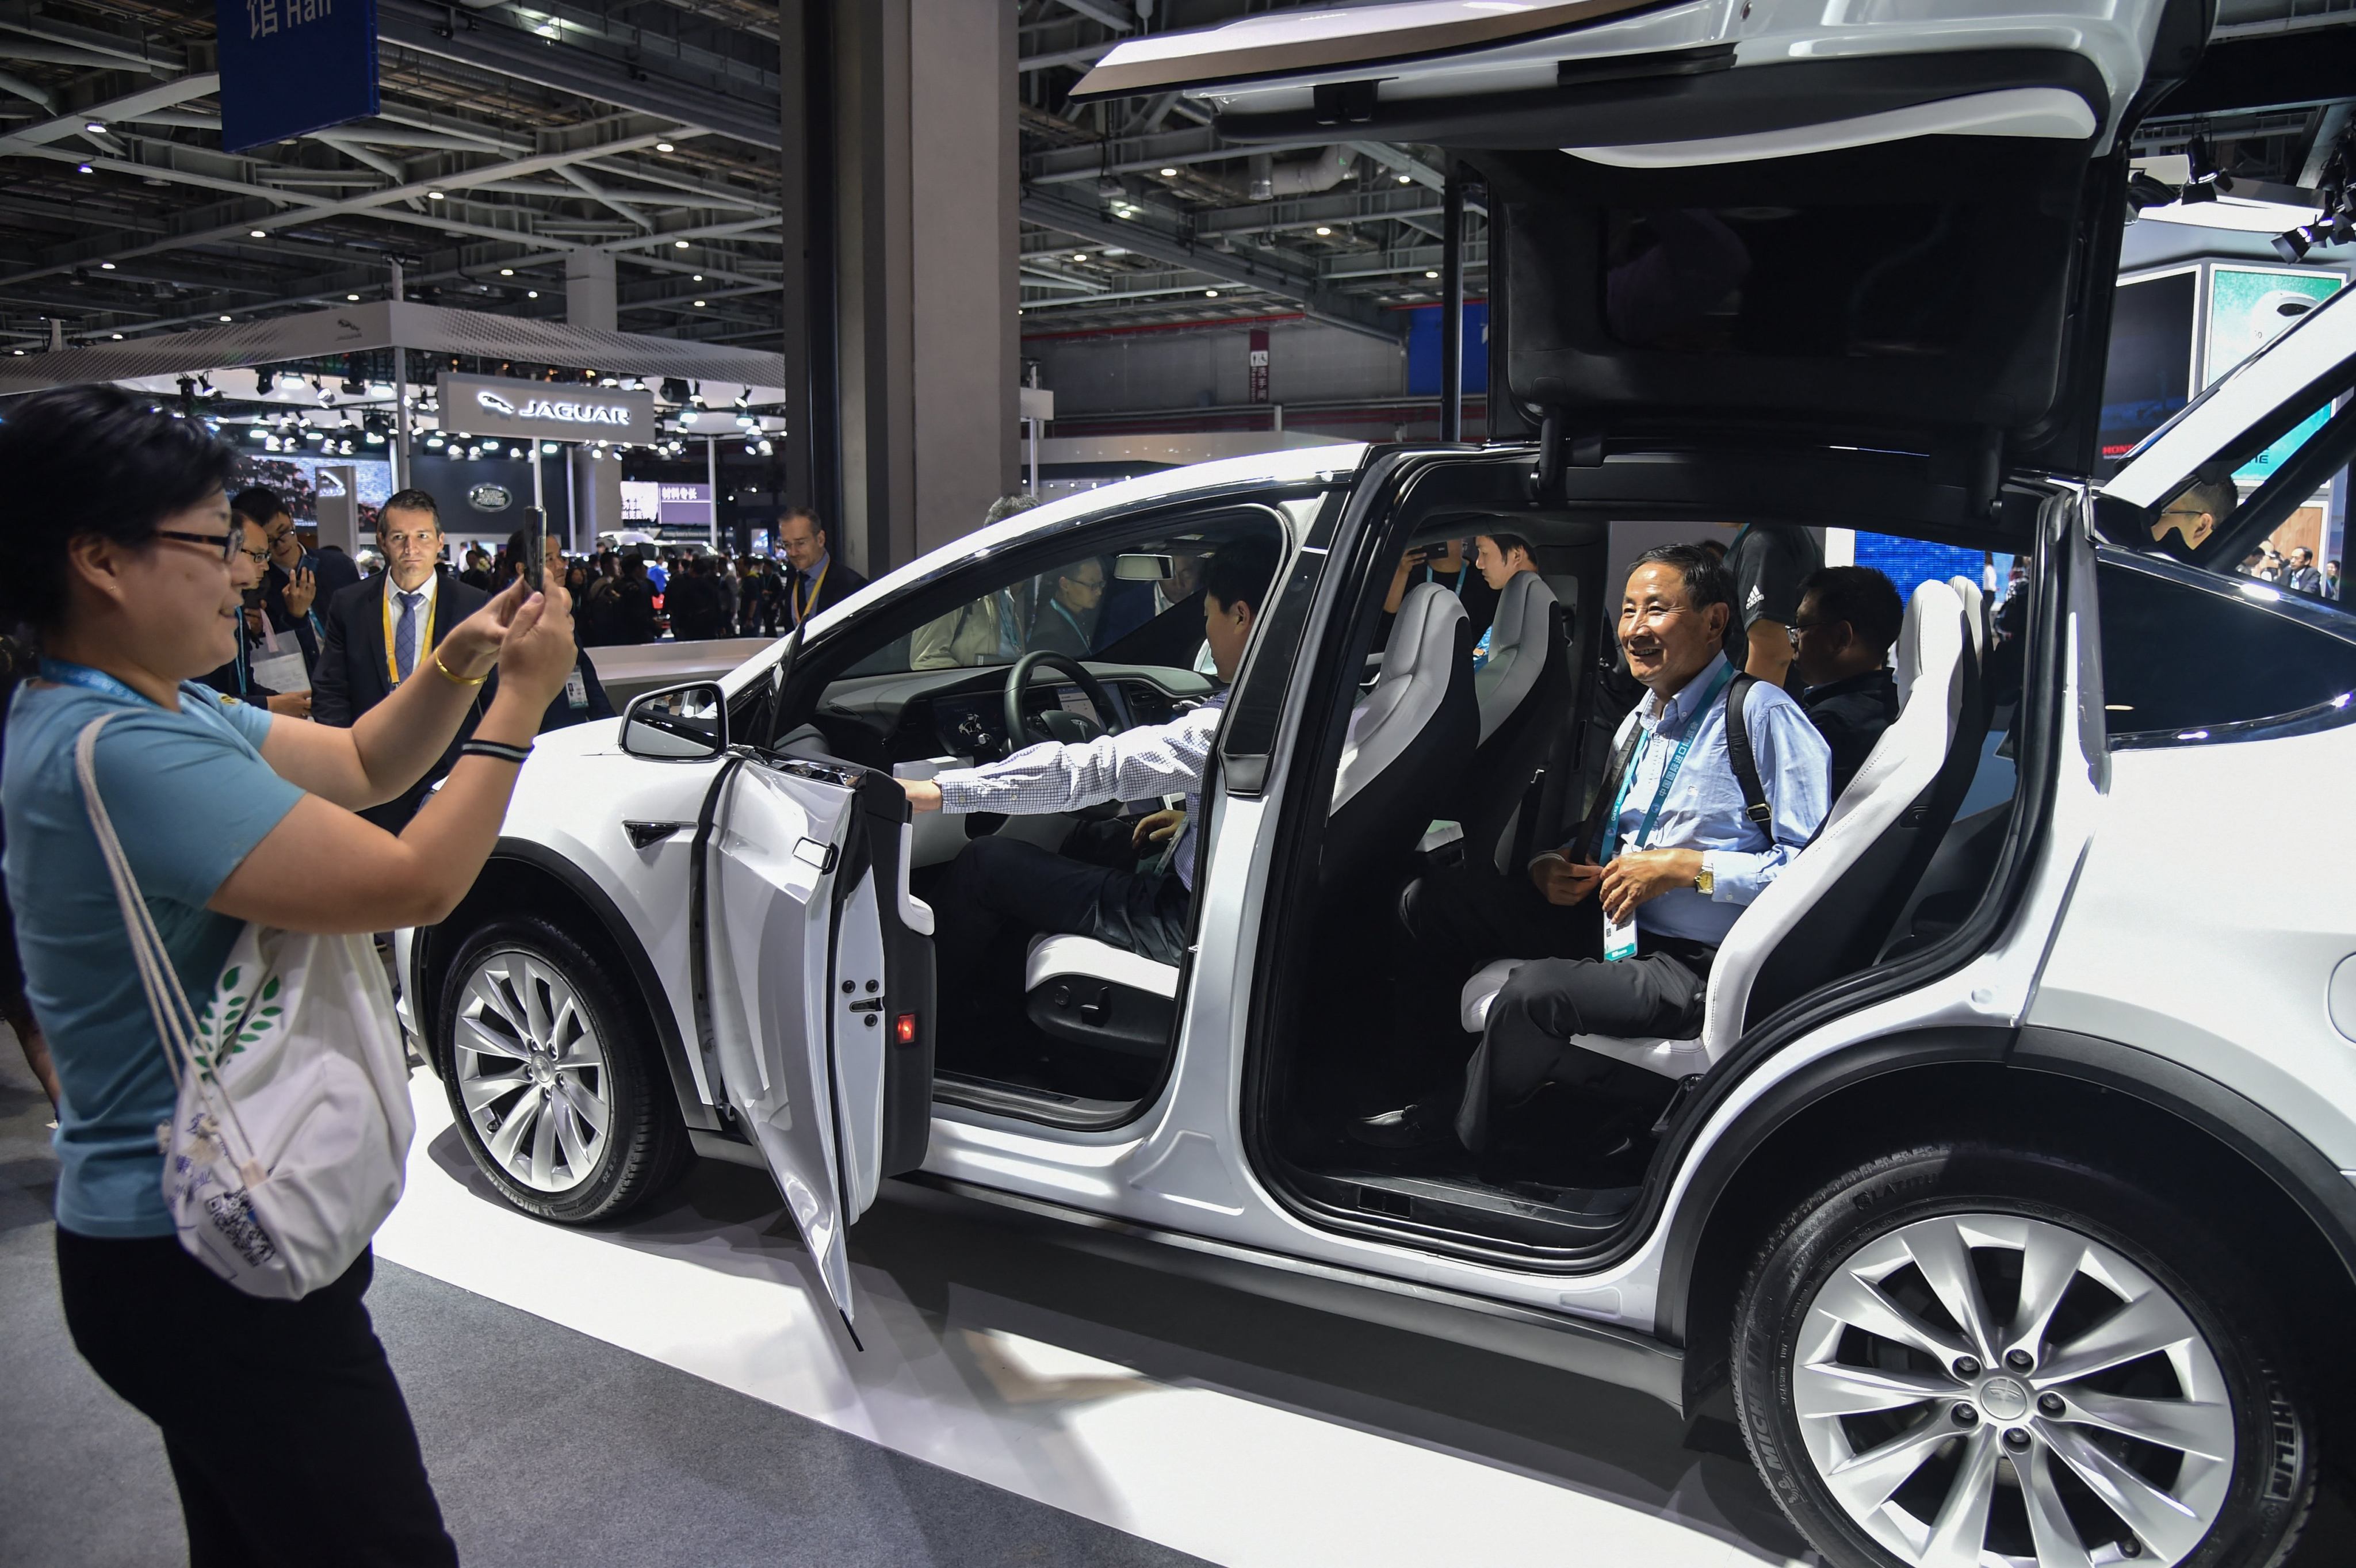 People check out a Tesla car at the China International Import Expo in Shanghai in 2019. Photo: AFP